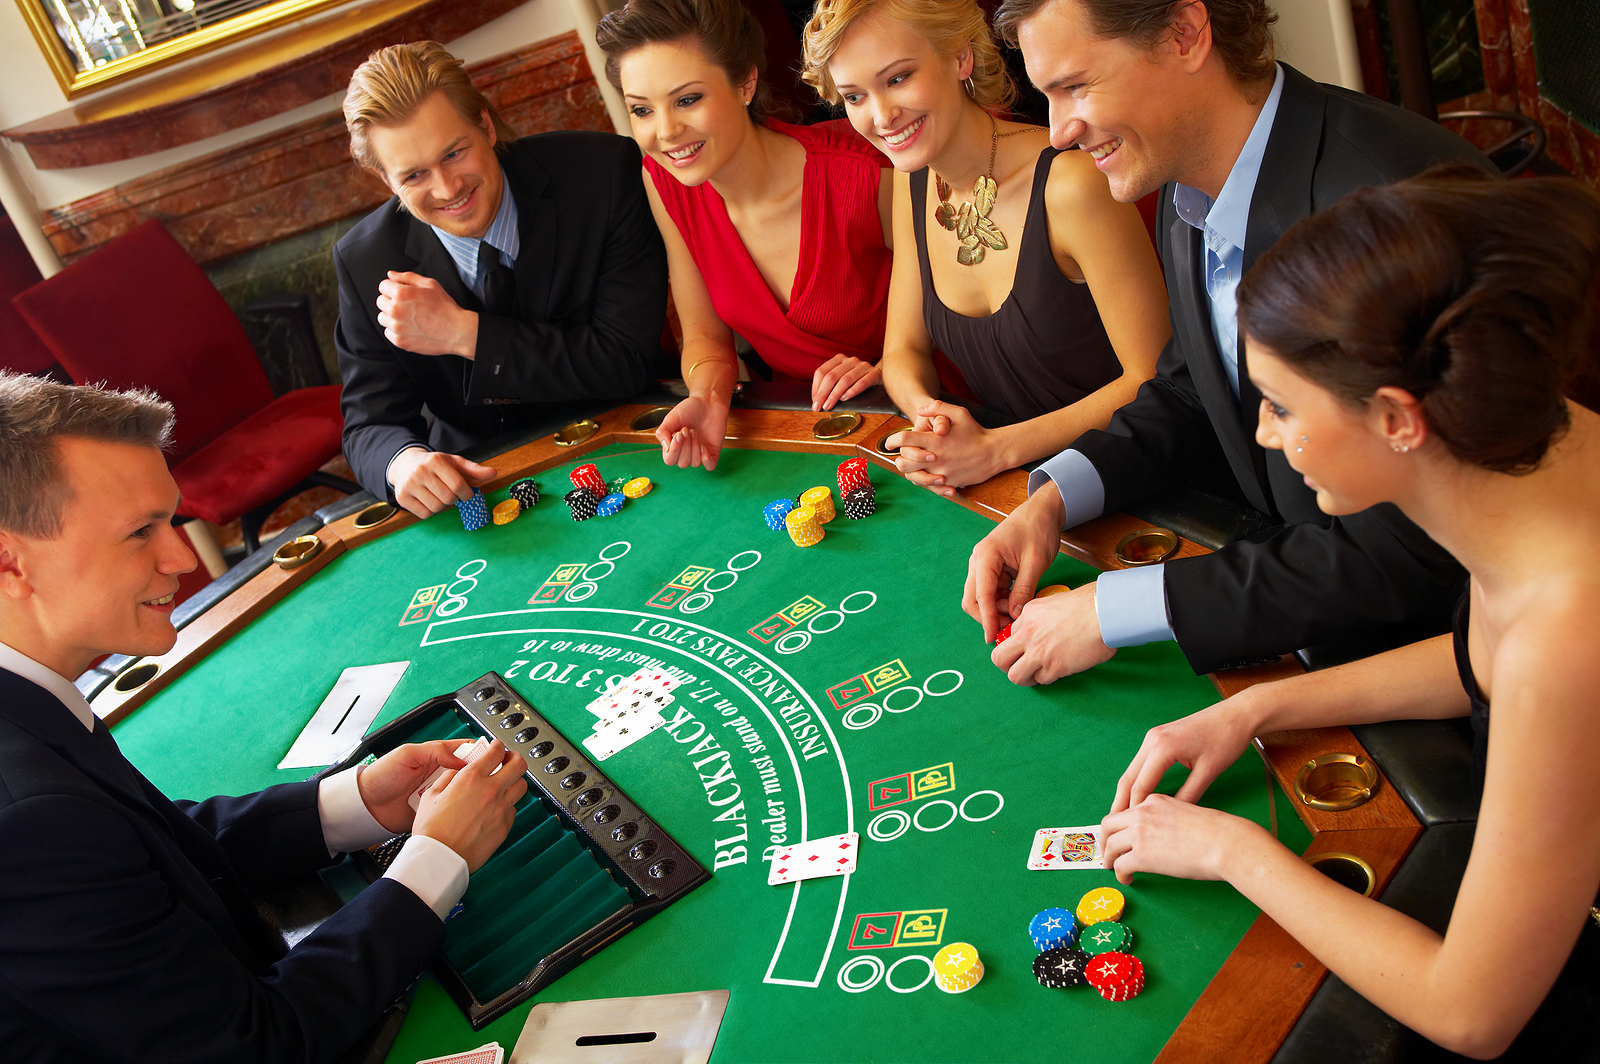 Playing Blackjack Online With Friends: Step-by-step Tutorial